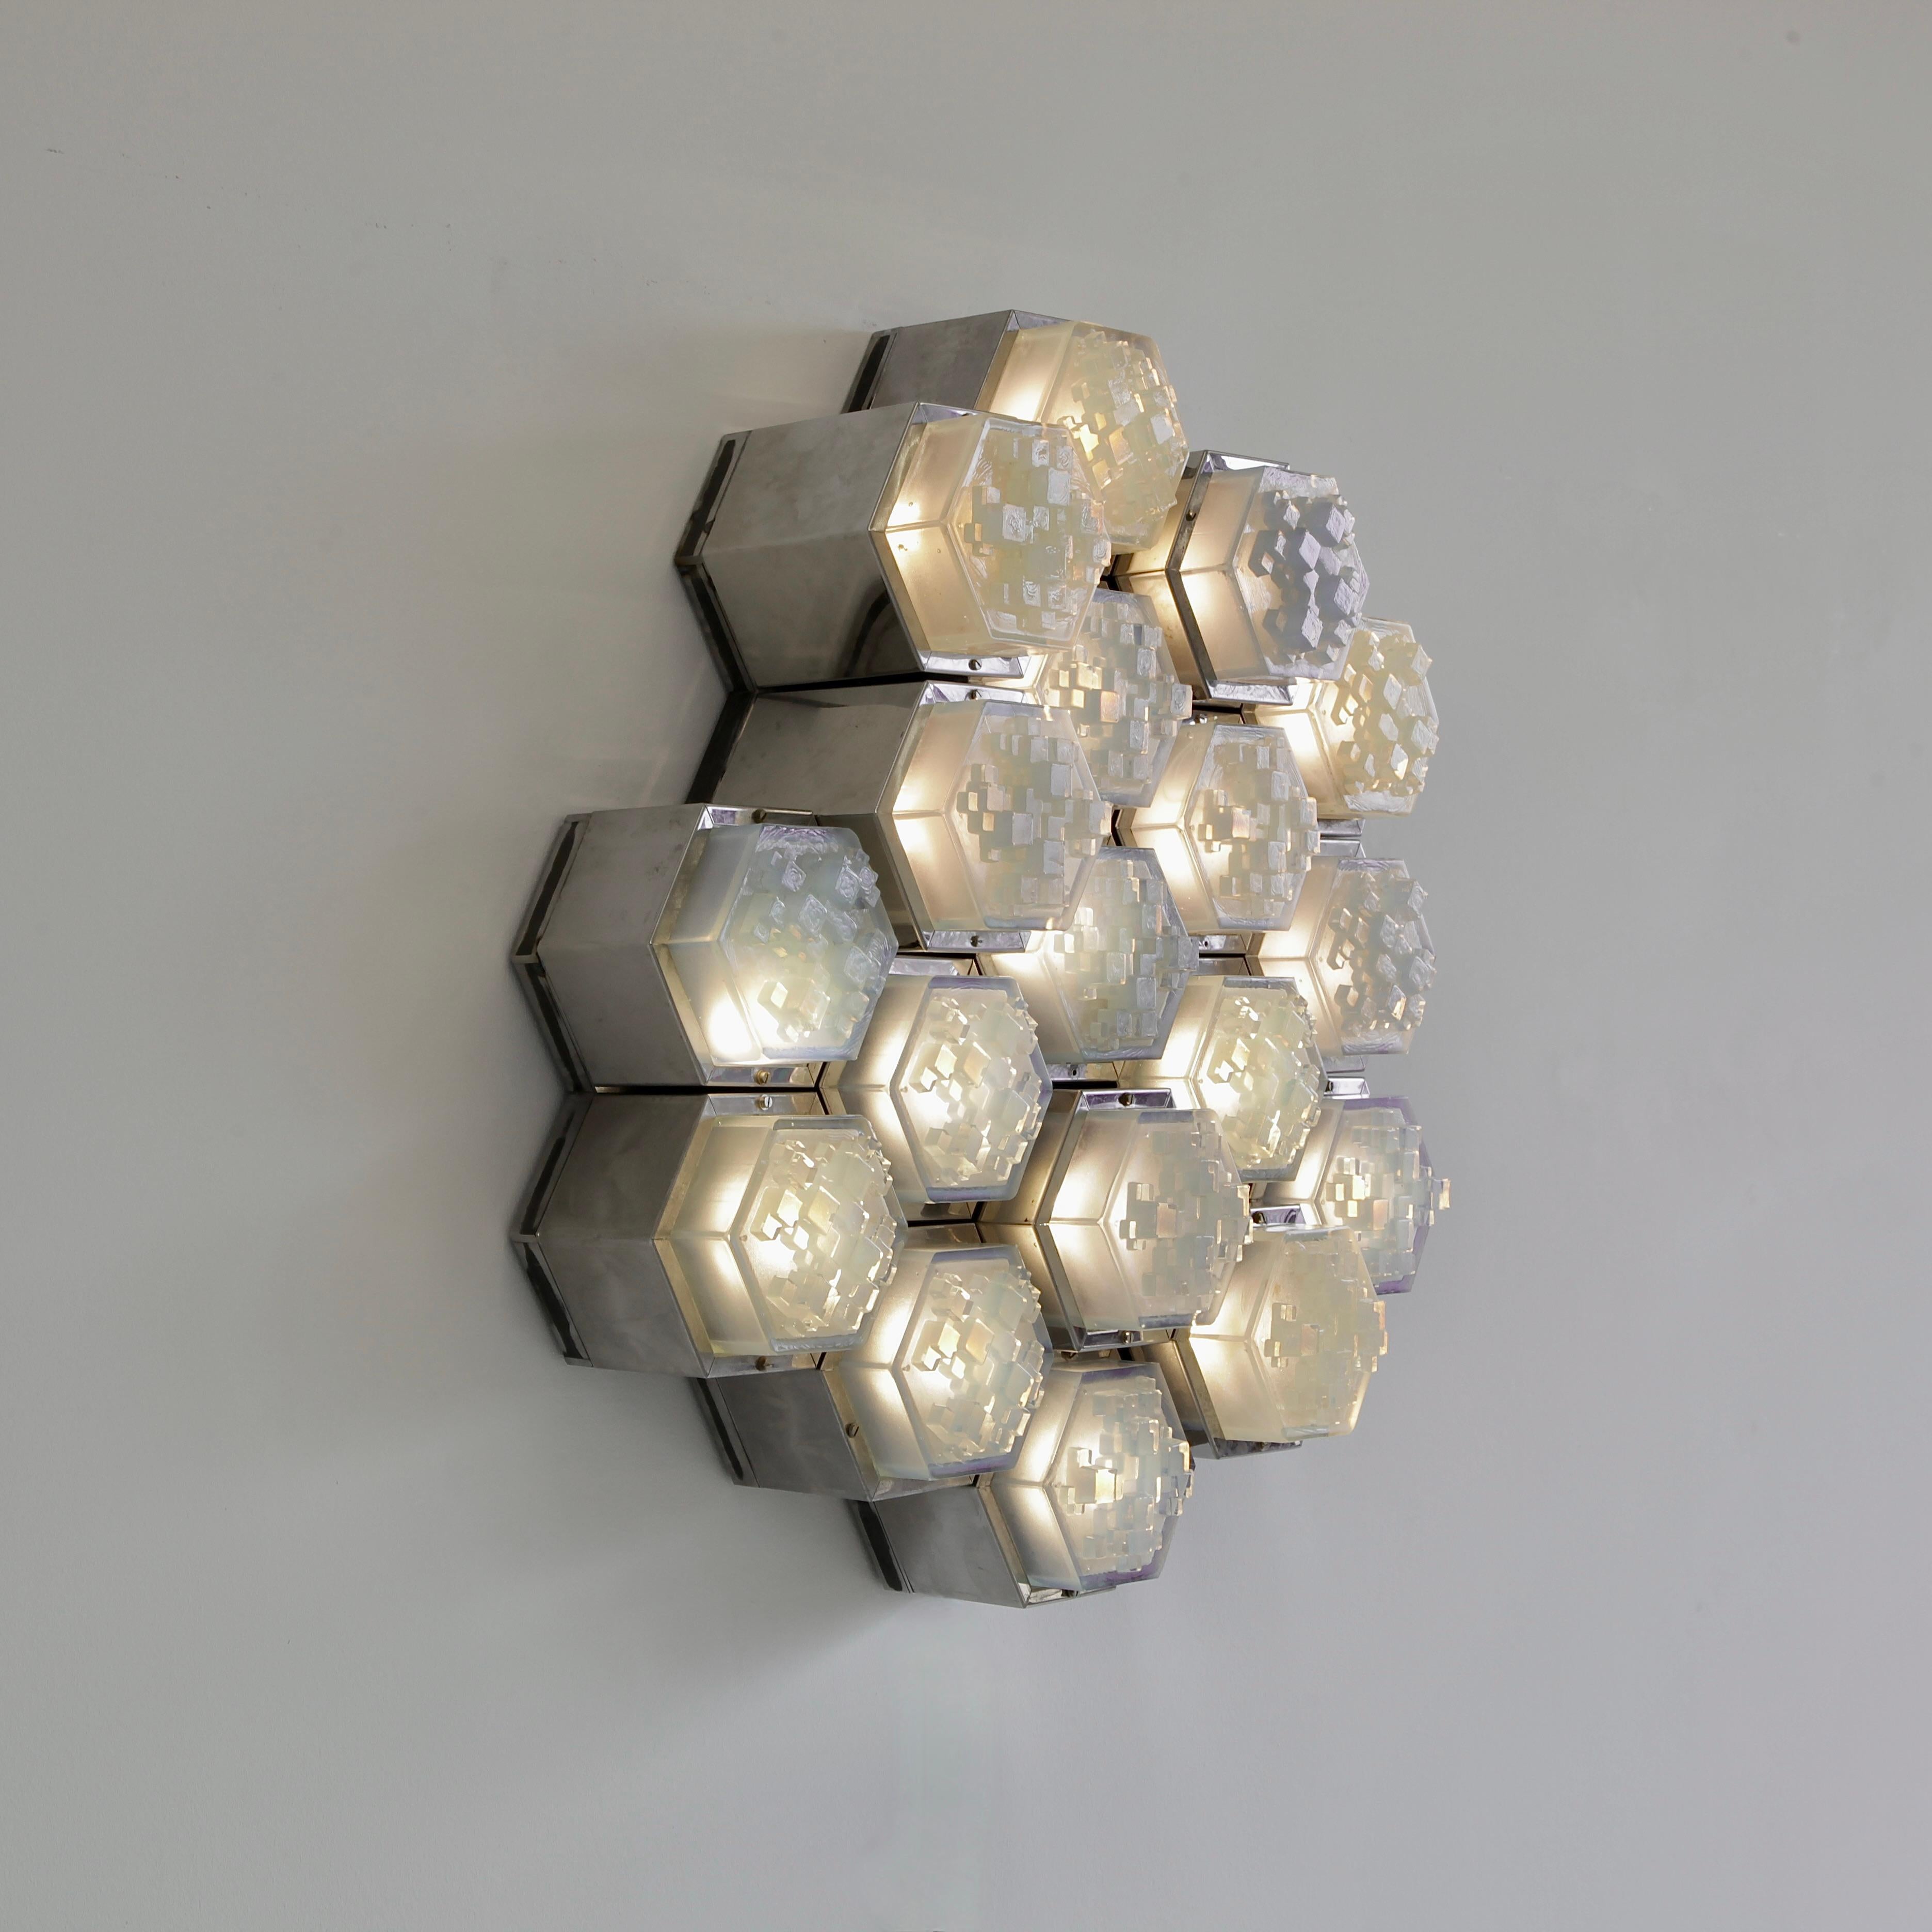 Large wall light designed by Albano Poli. Italy, Poliarte Verona, 1970s.

Large wall lamp/ sculpture using 18 individual light frames with chrome bodies in two different sizes. Inserted are the typical moulded Poliarte glass pieces in light blue